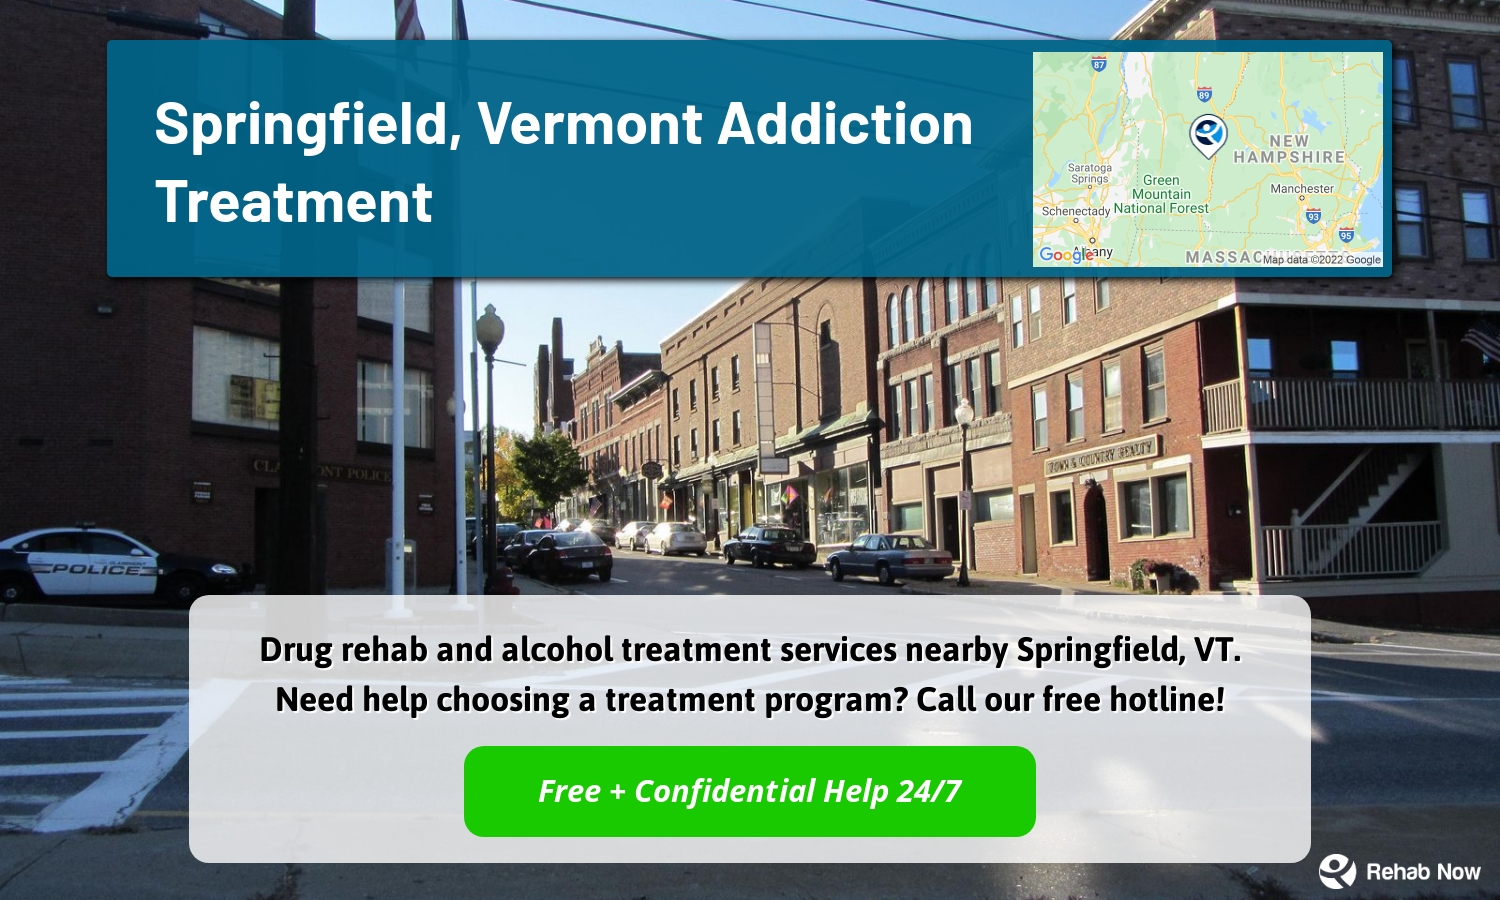 Drug rehab and alcohol treatment services nearby Springfield, VT. Need help choosing a treatment program? Call our free hotline!